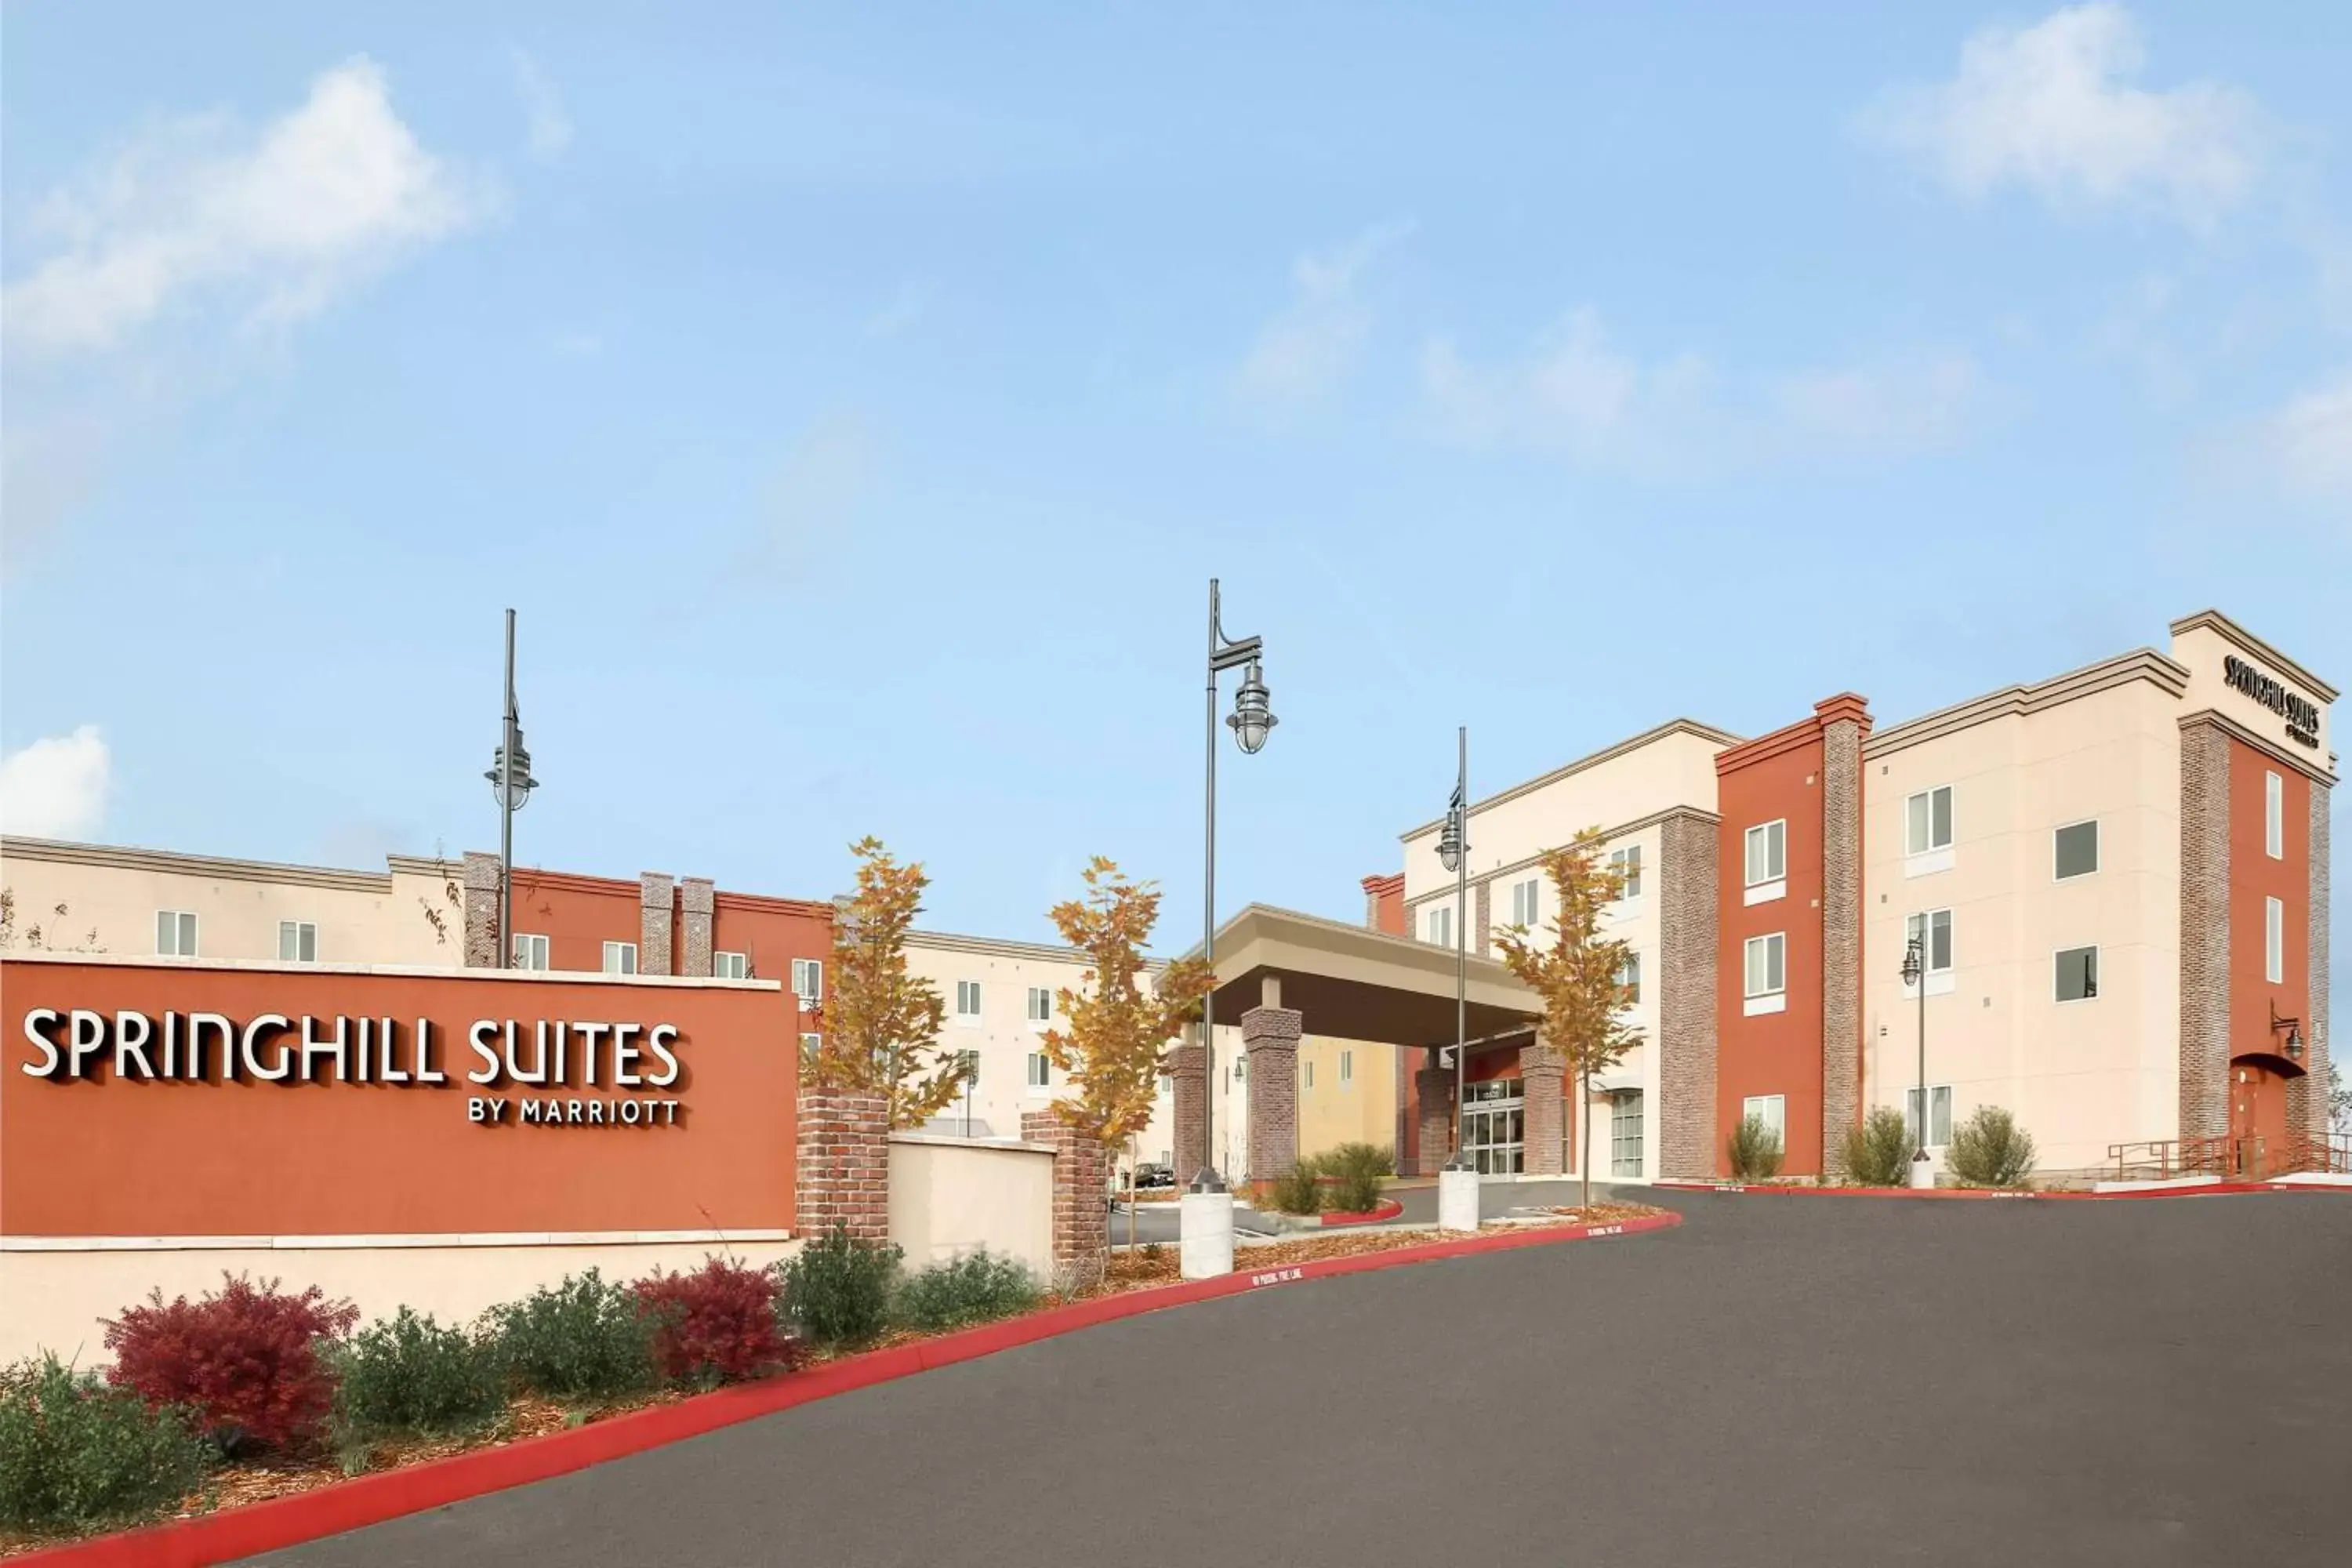 Property building in SpringHill Suites by Marriott Auburn